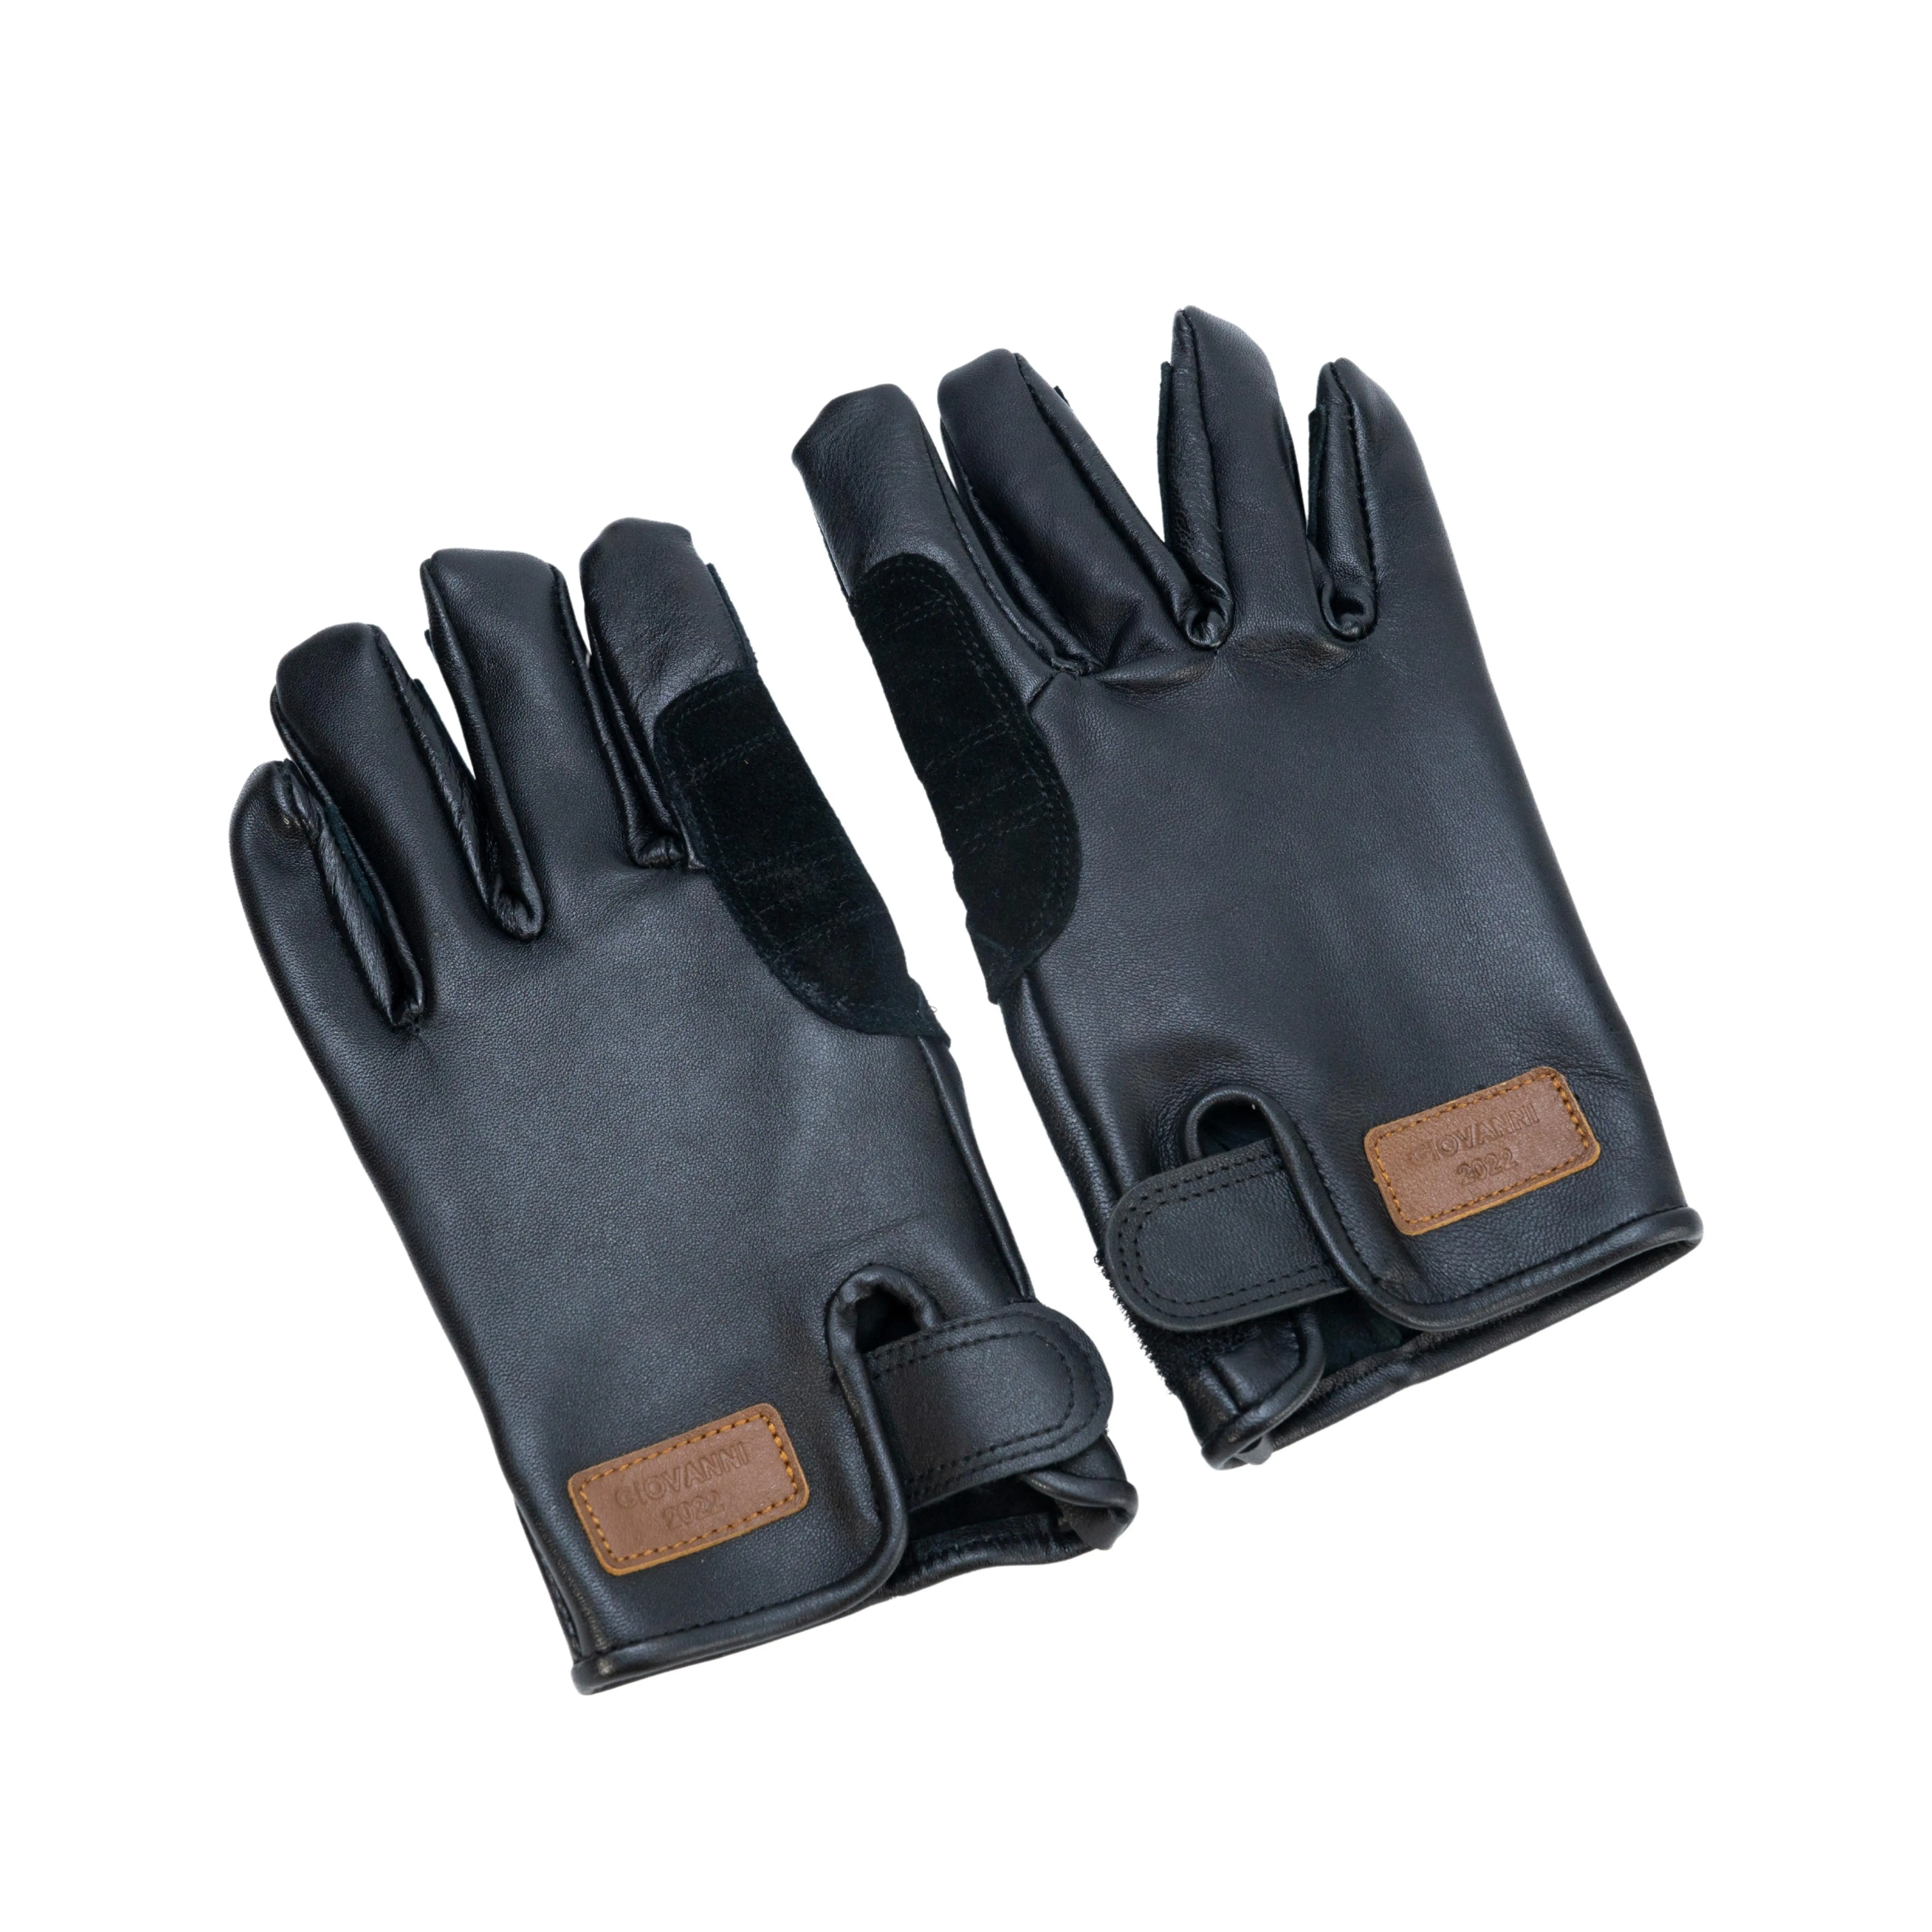 New Arrival Black Pure Leather Fashion Driving Dressing Gloves Leather Dressing Gloves High Quality